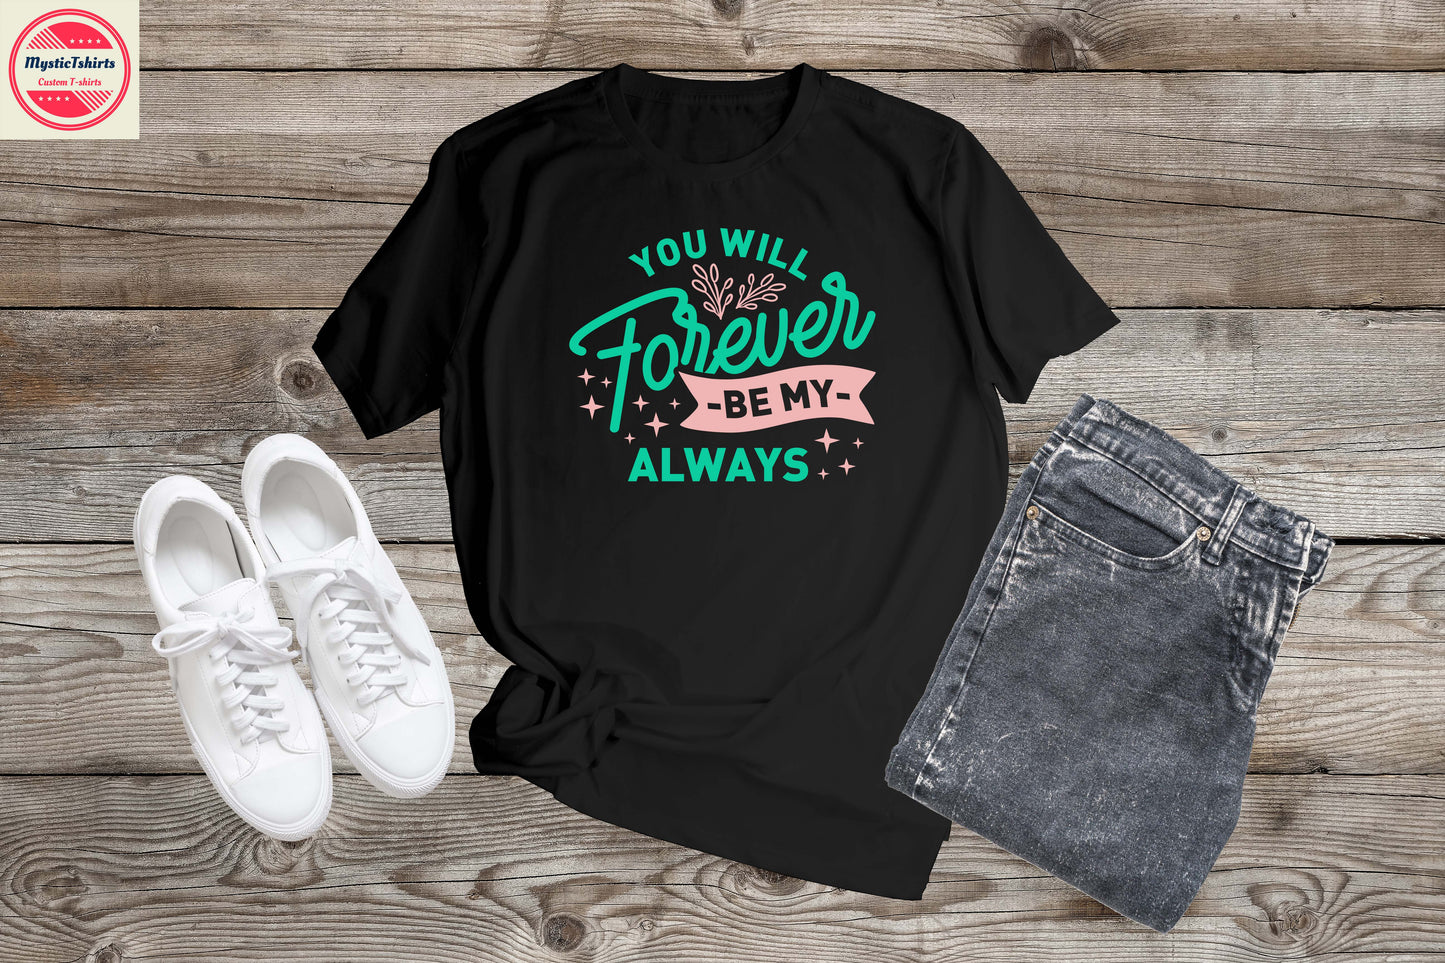 312. LOVE/VALENTINE, YOU WILL FOREVER BE MY ALWAYS Custom Made Shirt, Personalized T-Shirt, Custom Text, Make Your Own Shirt, Custom Tee